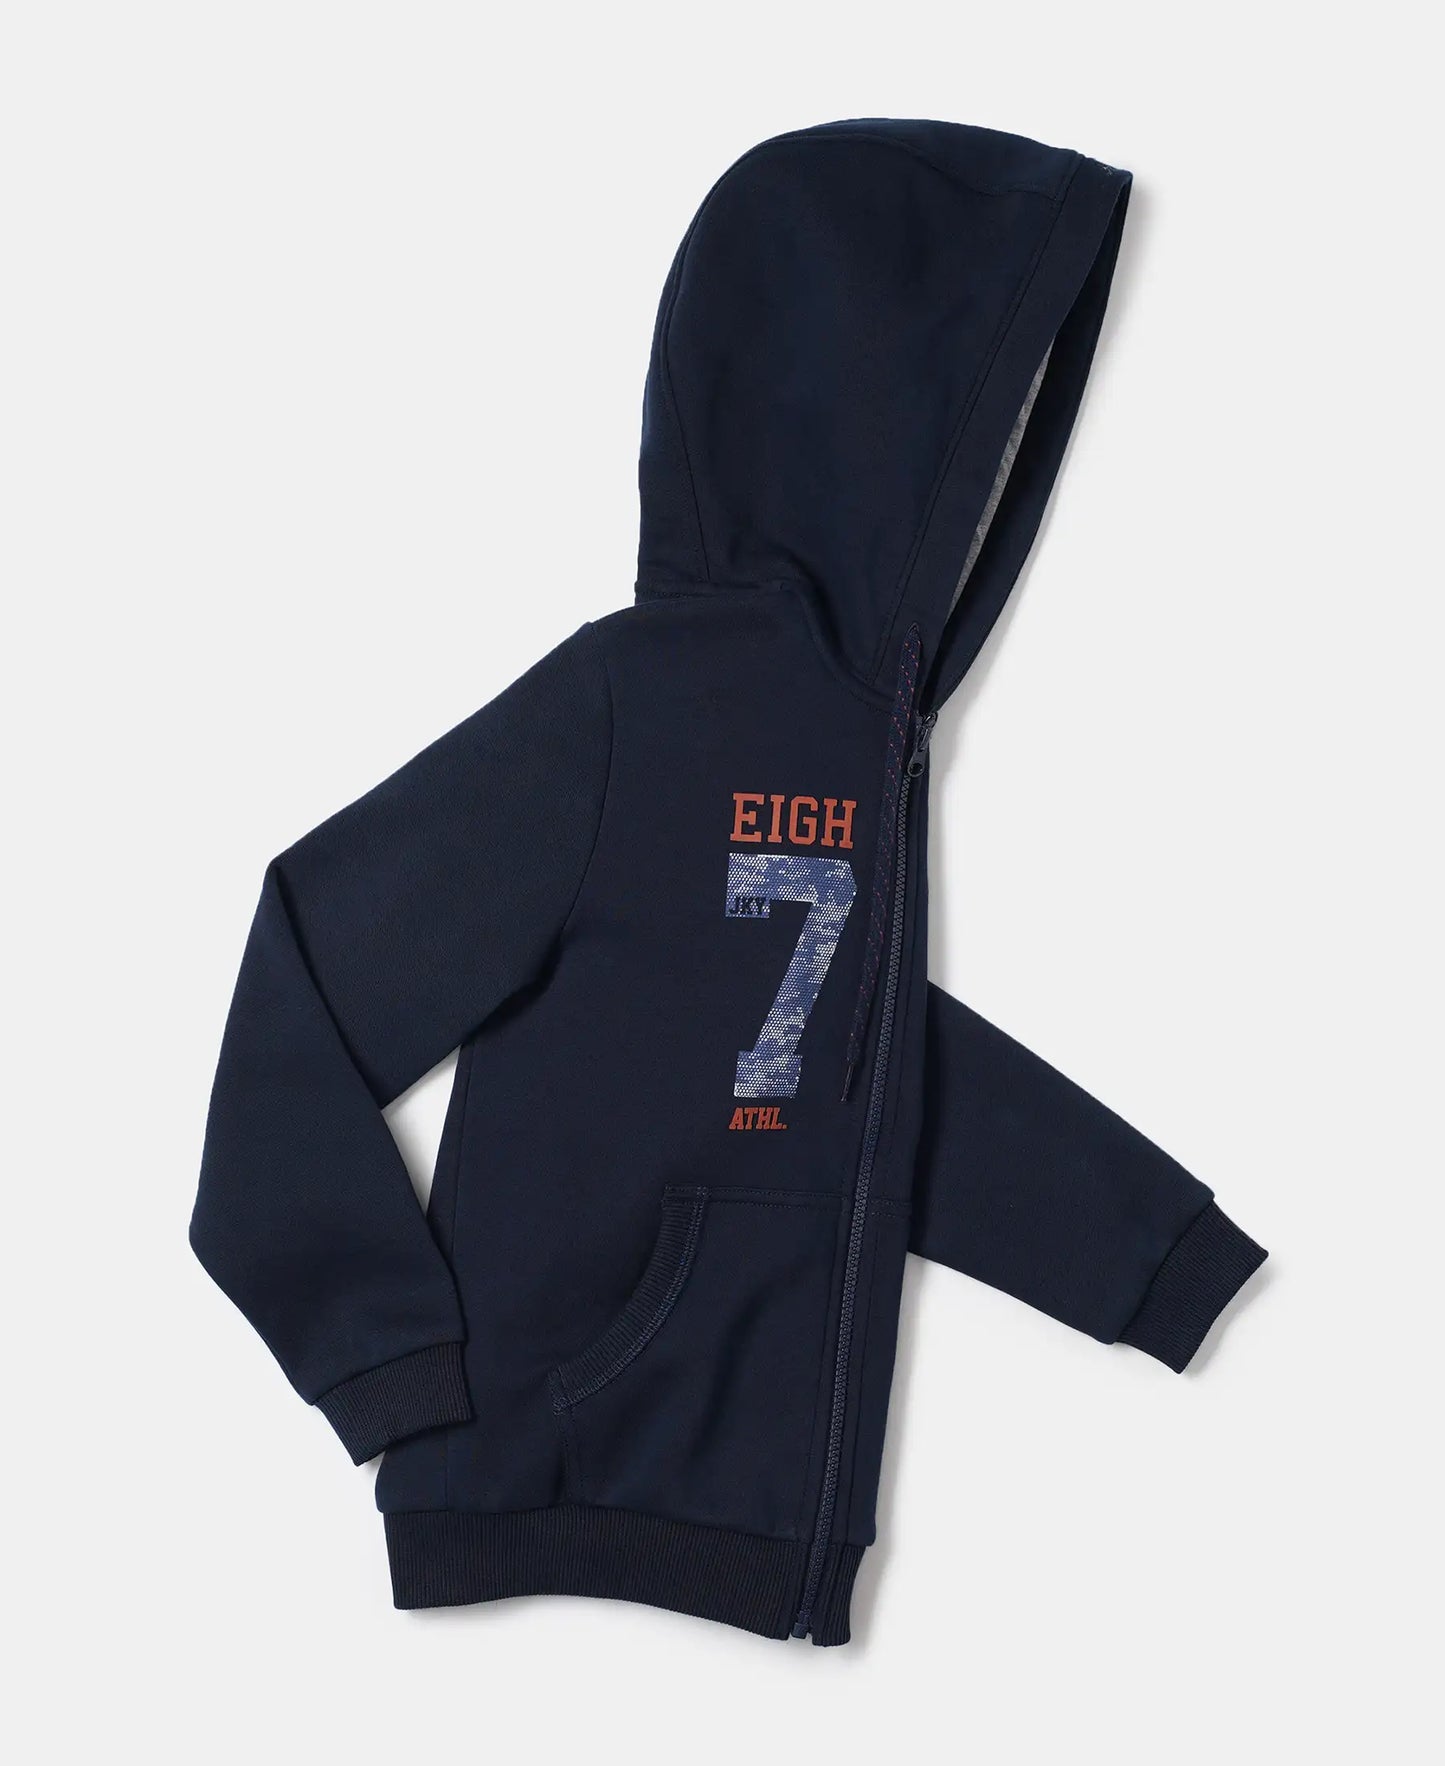 Super Combed Cotton Rich Fleece Fabric Graphic Printed Hoodie Jacket - Navy-6